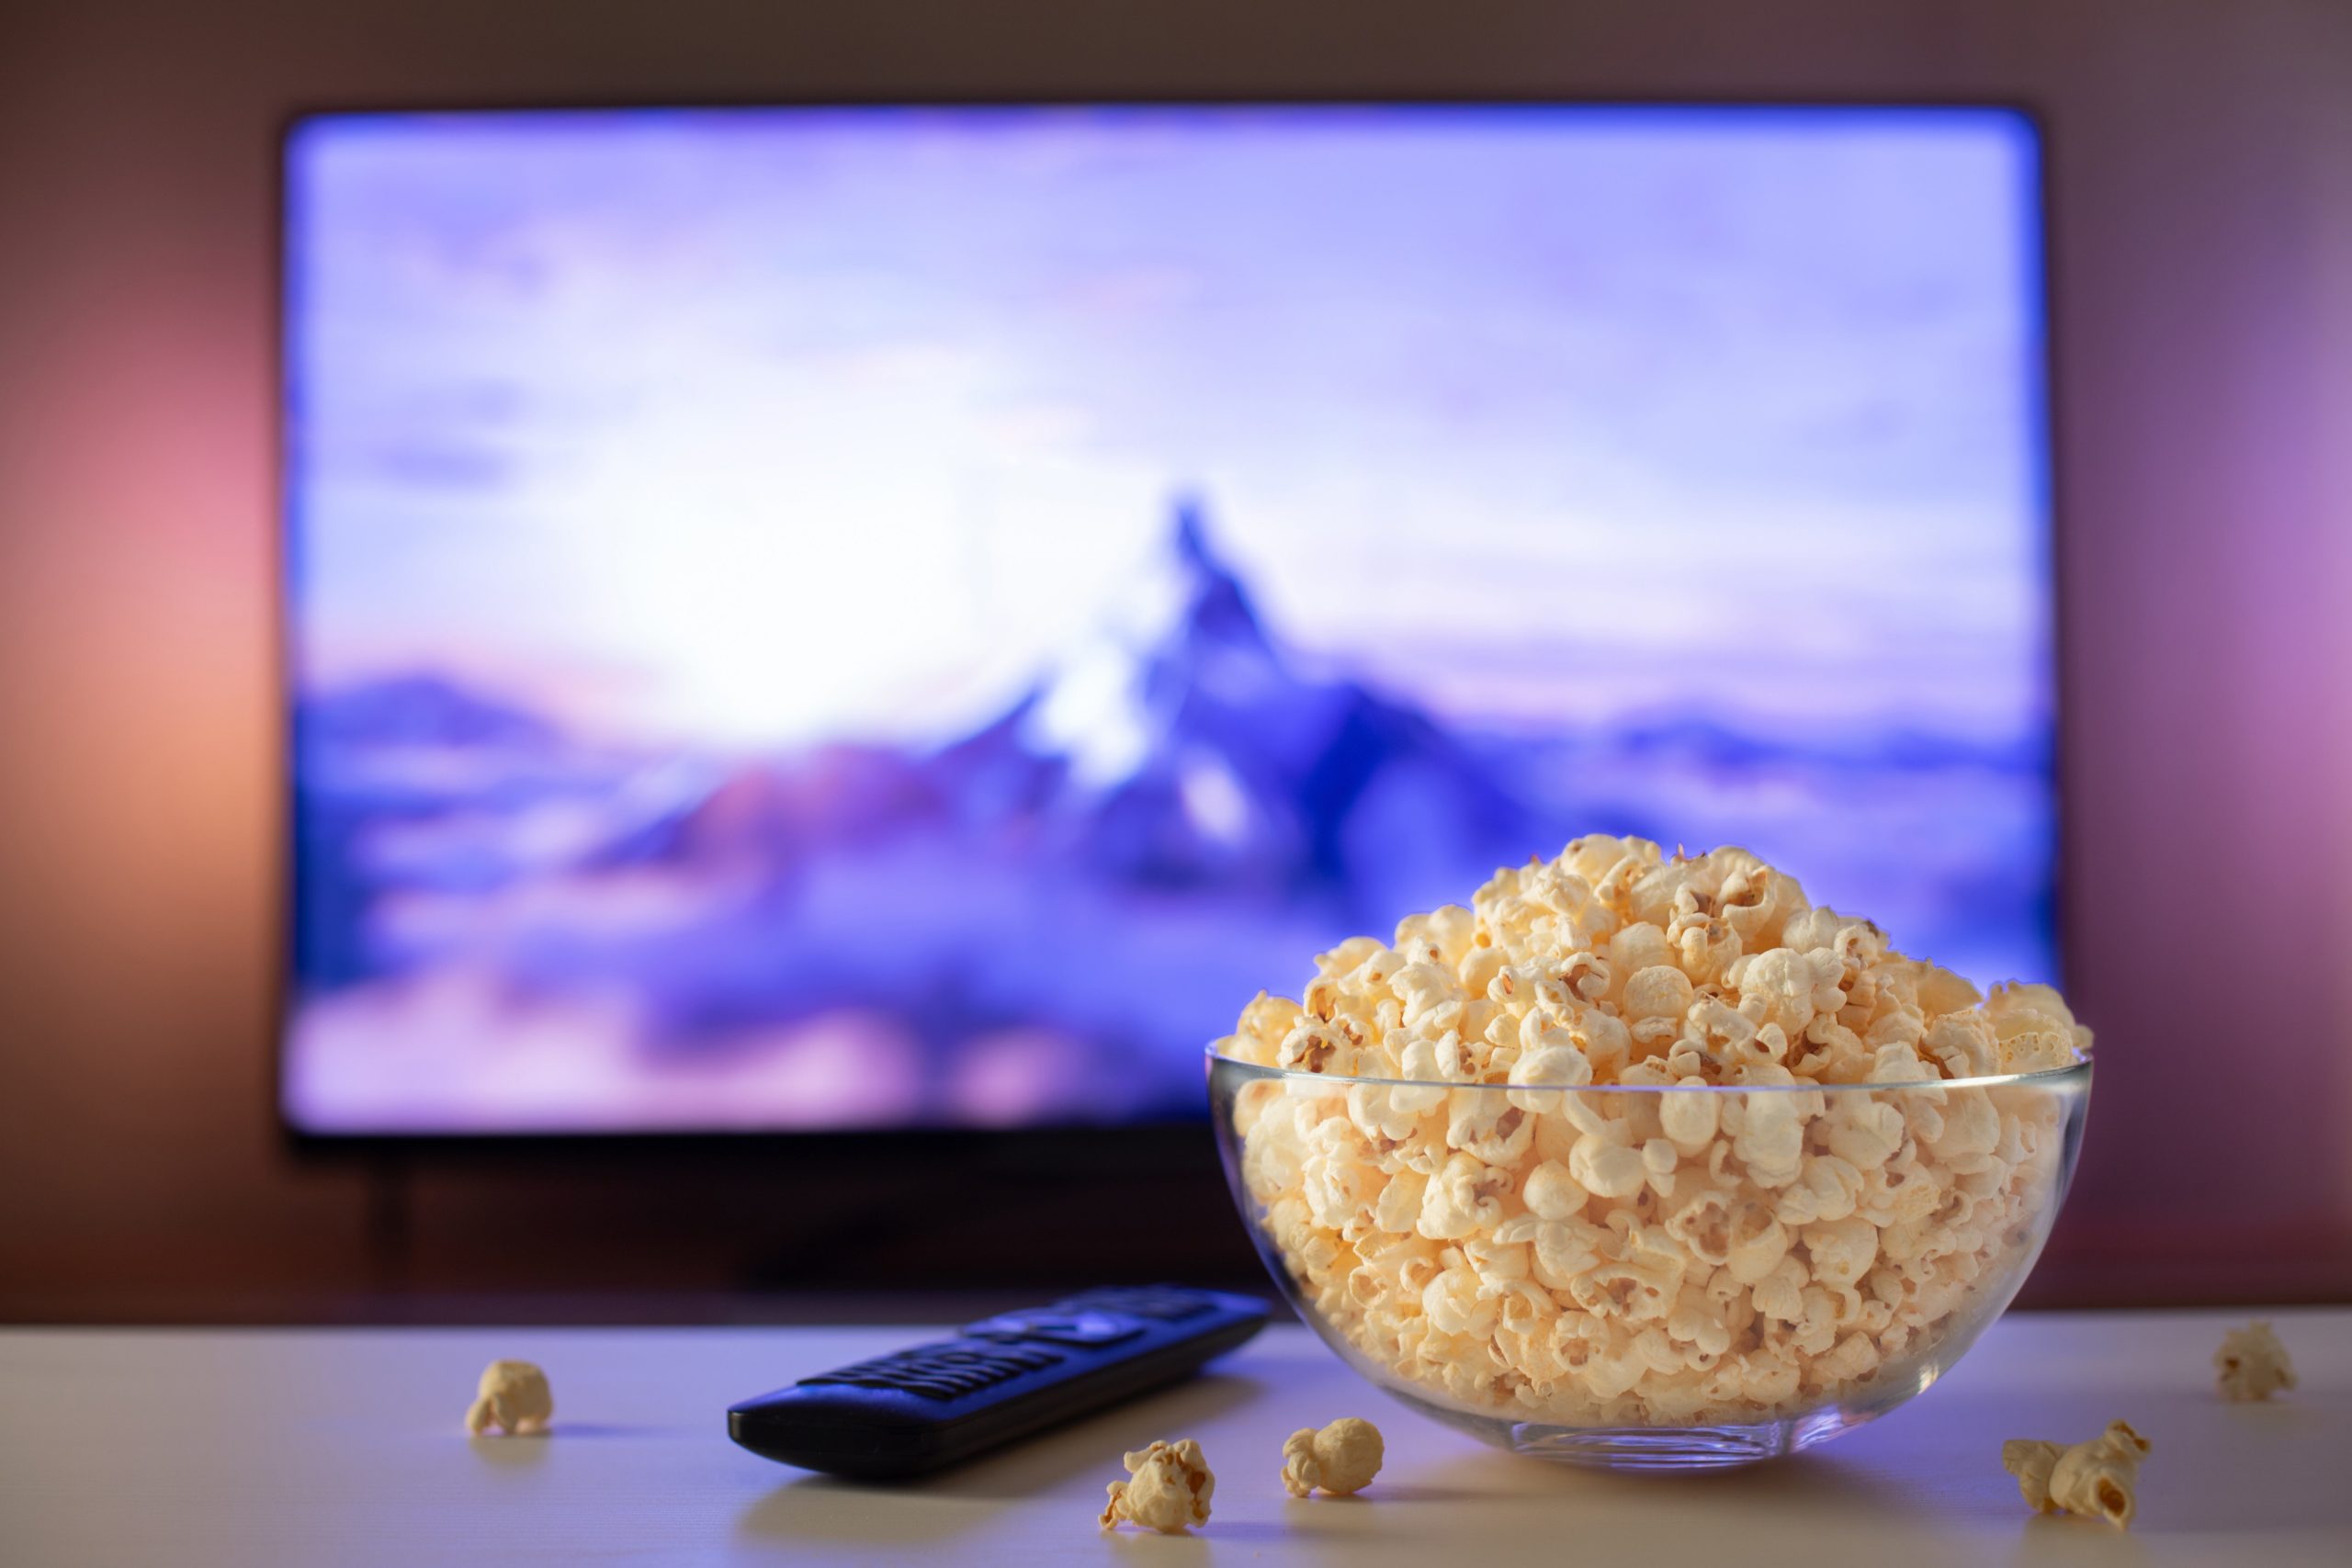 A bowl of popcorn and a clicker on a coffee table with a tv in the background